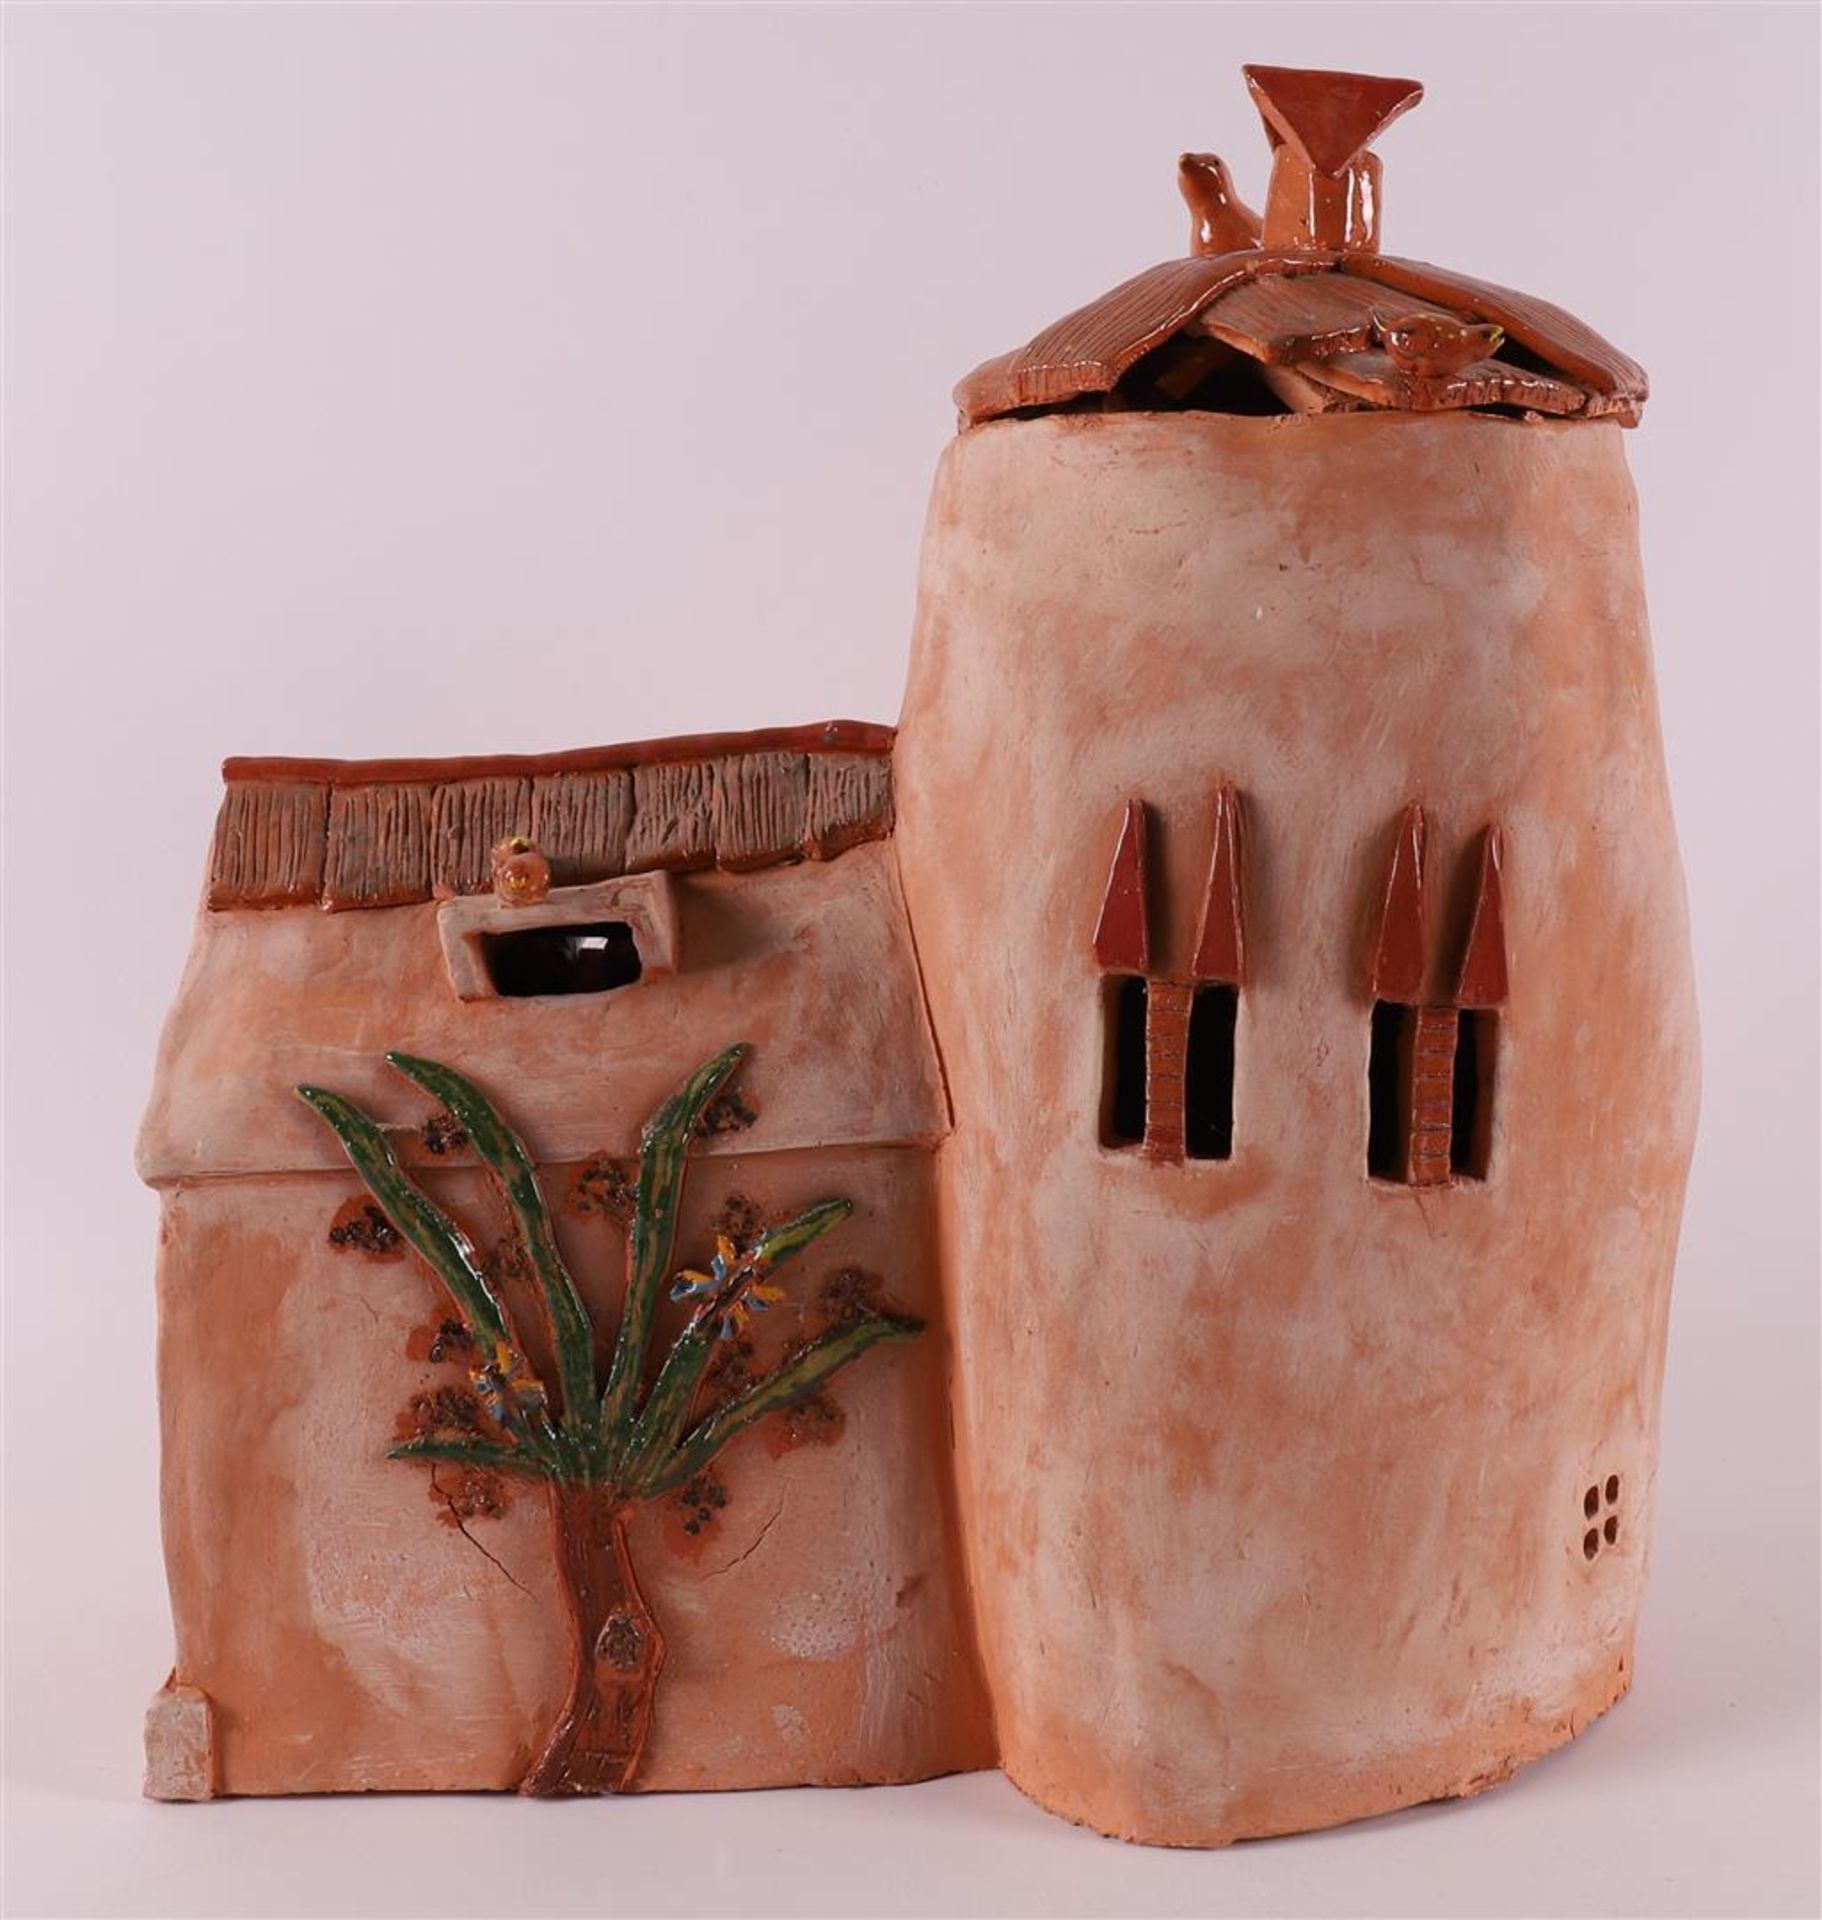 A ceramic sculpture of a house with a loose roof, modern/contemporary.